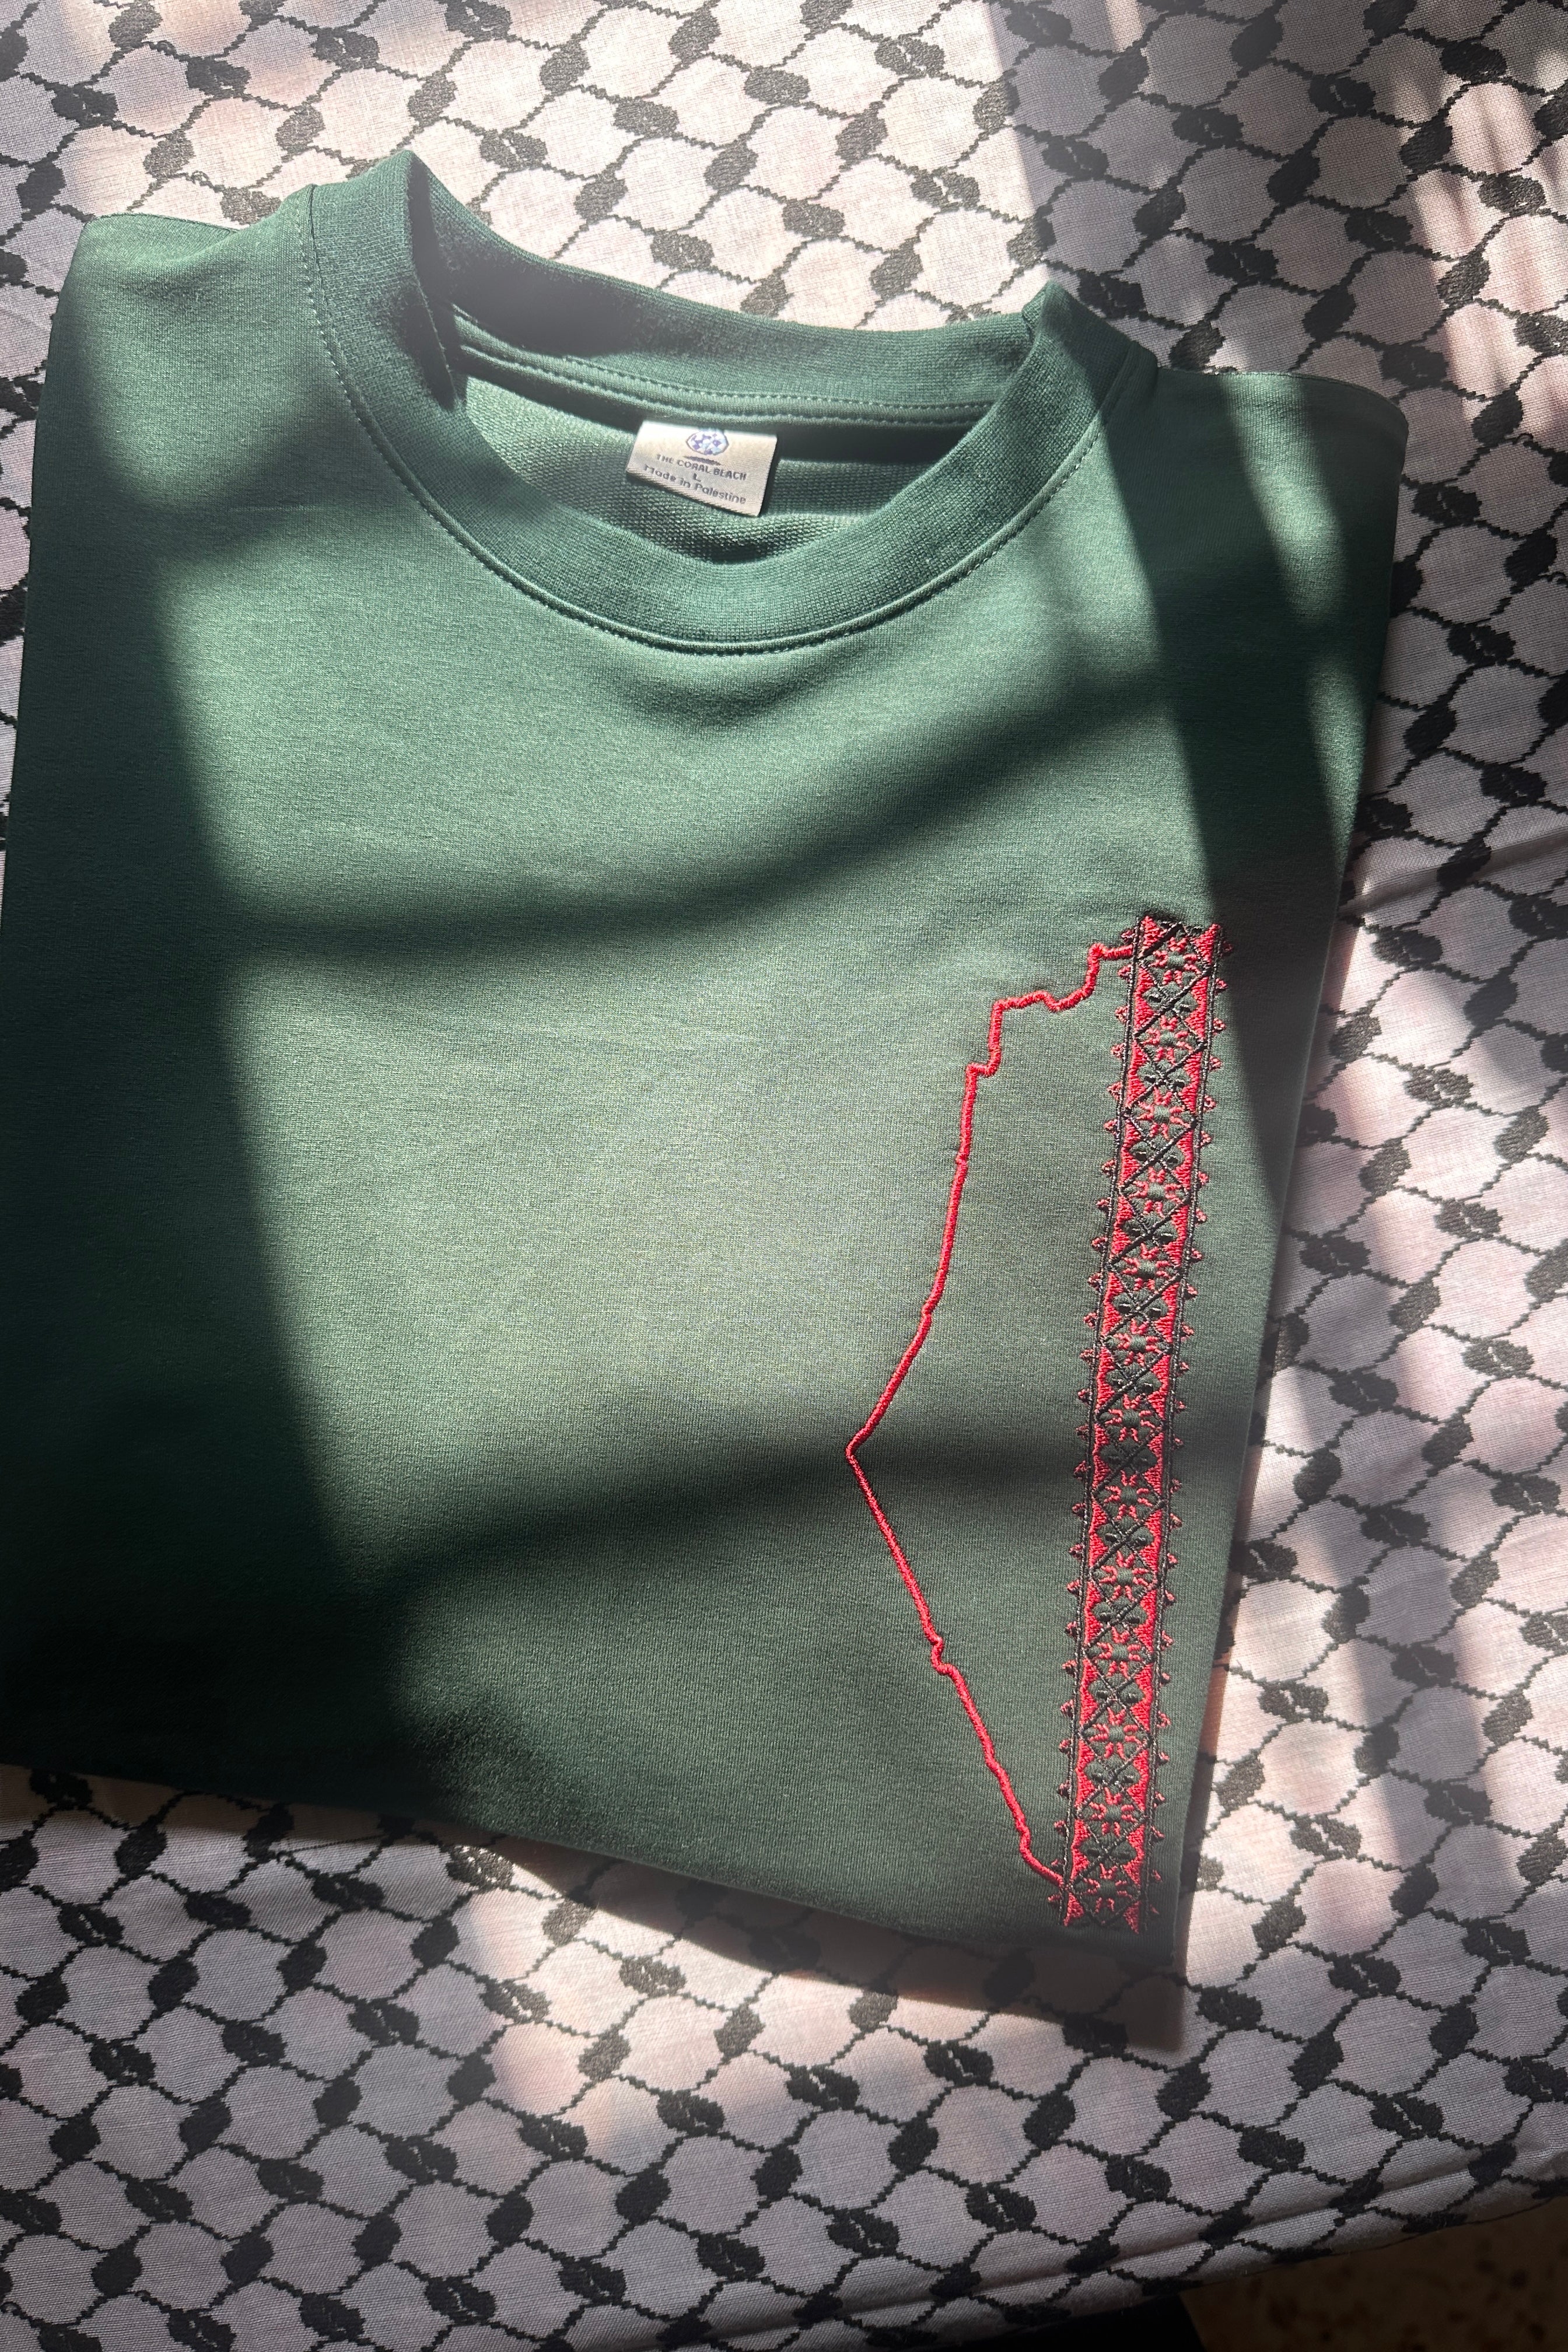 My borders are Palestinian T-shirt